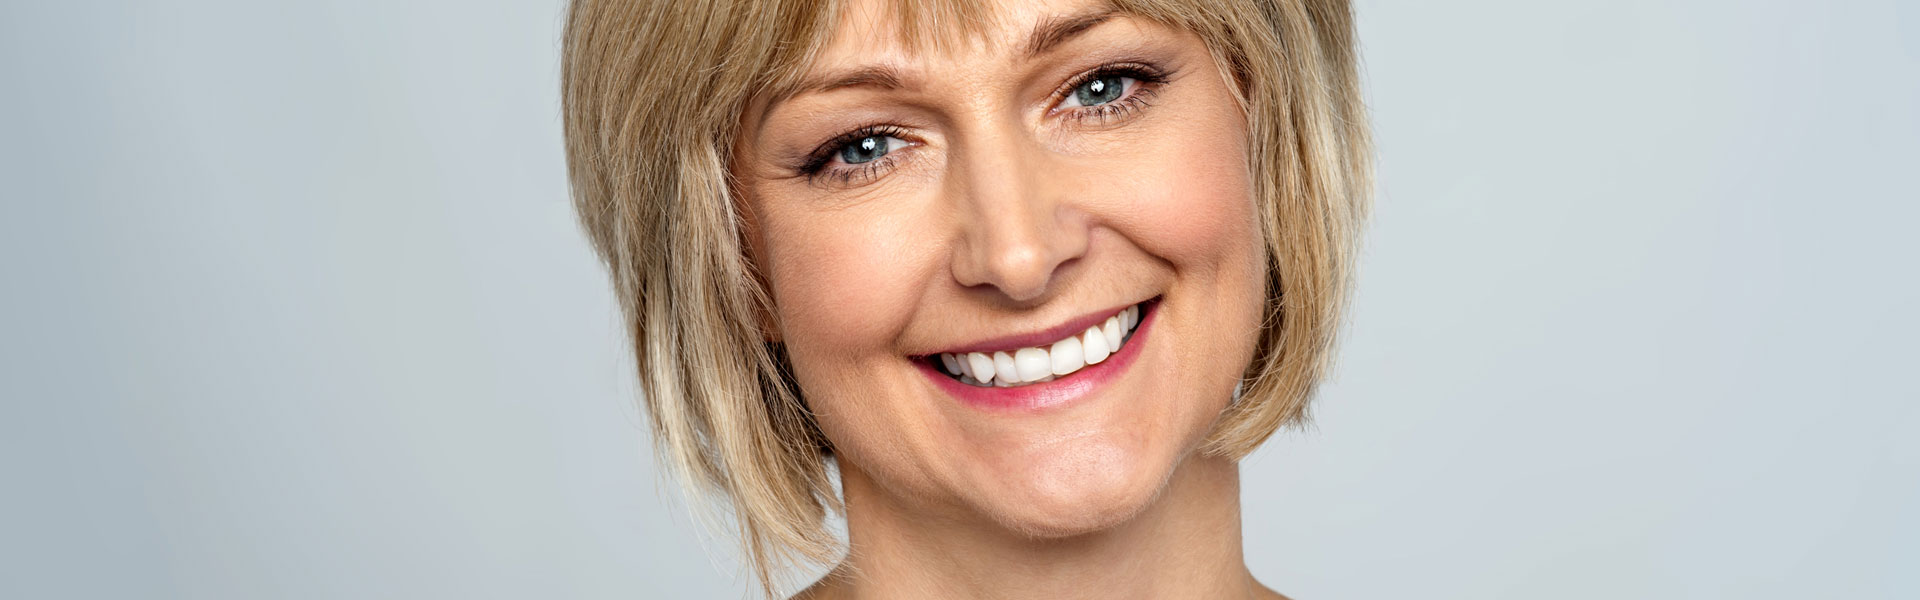 Smiling middle aged caucasian woman